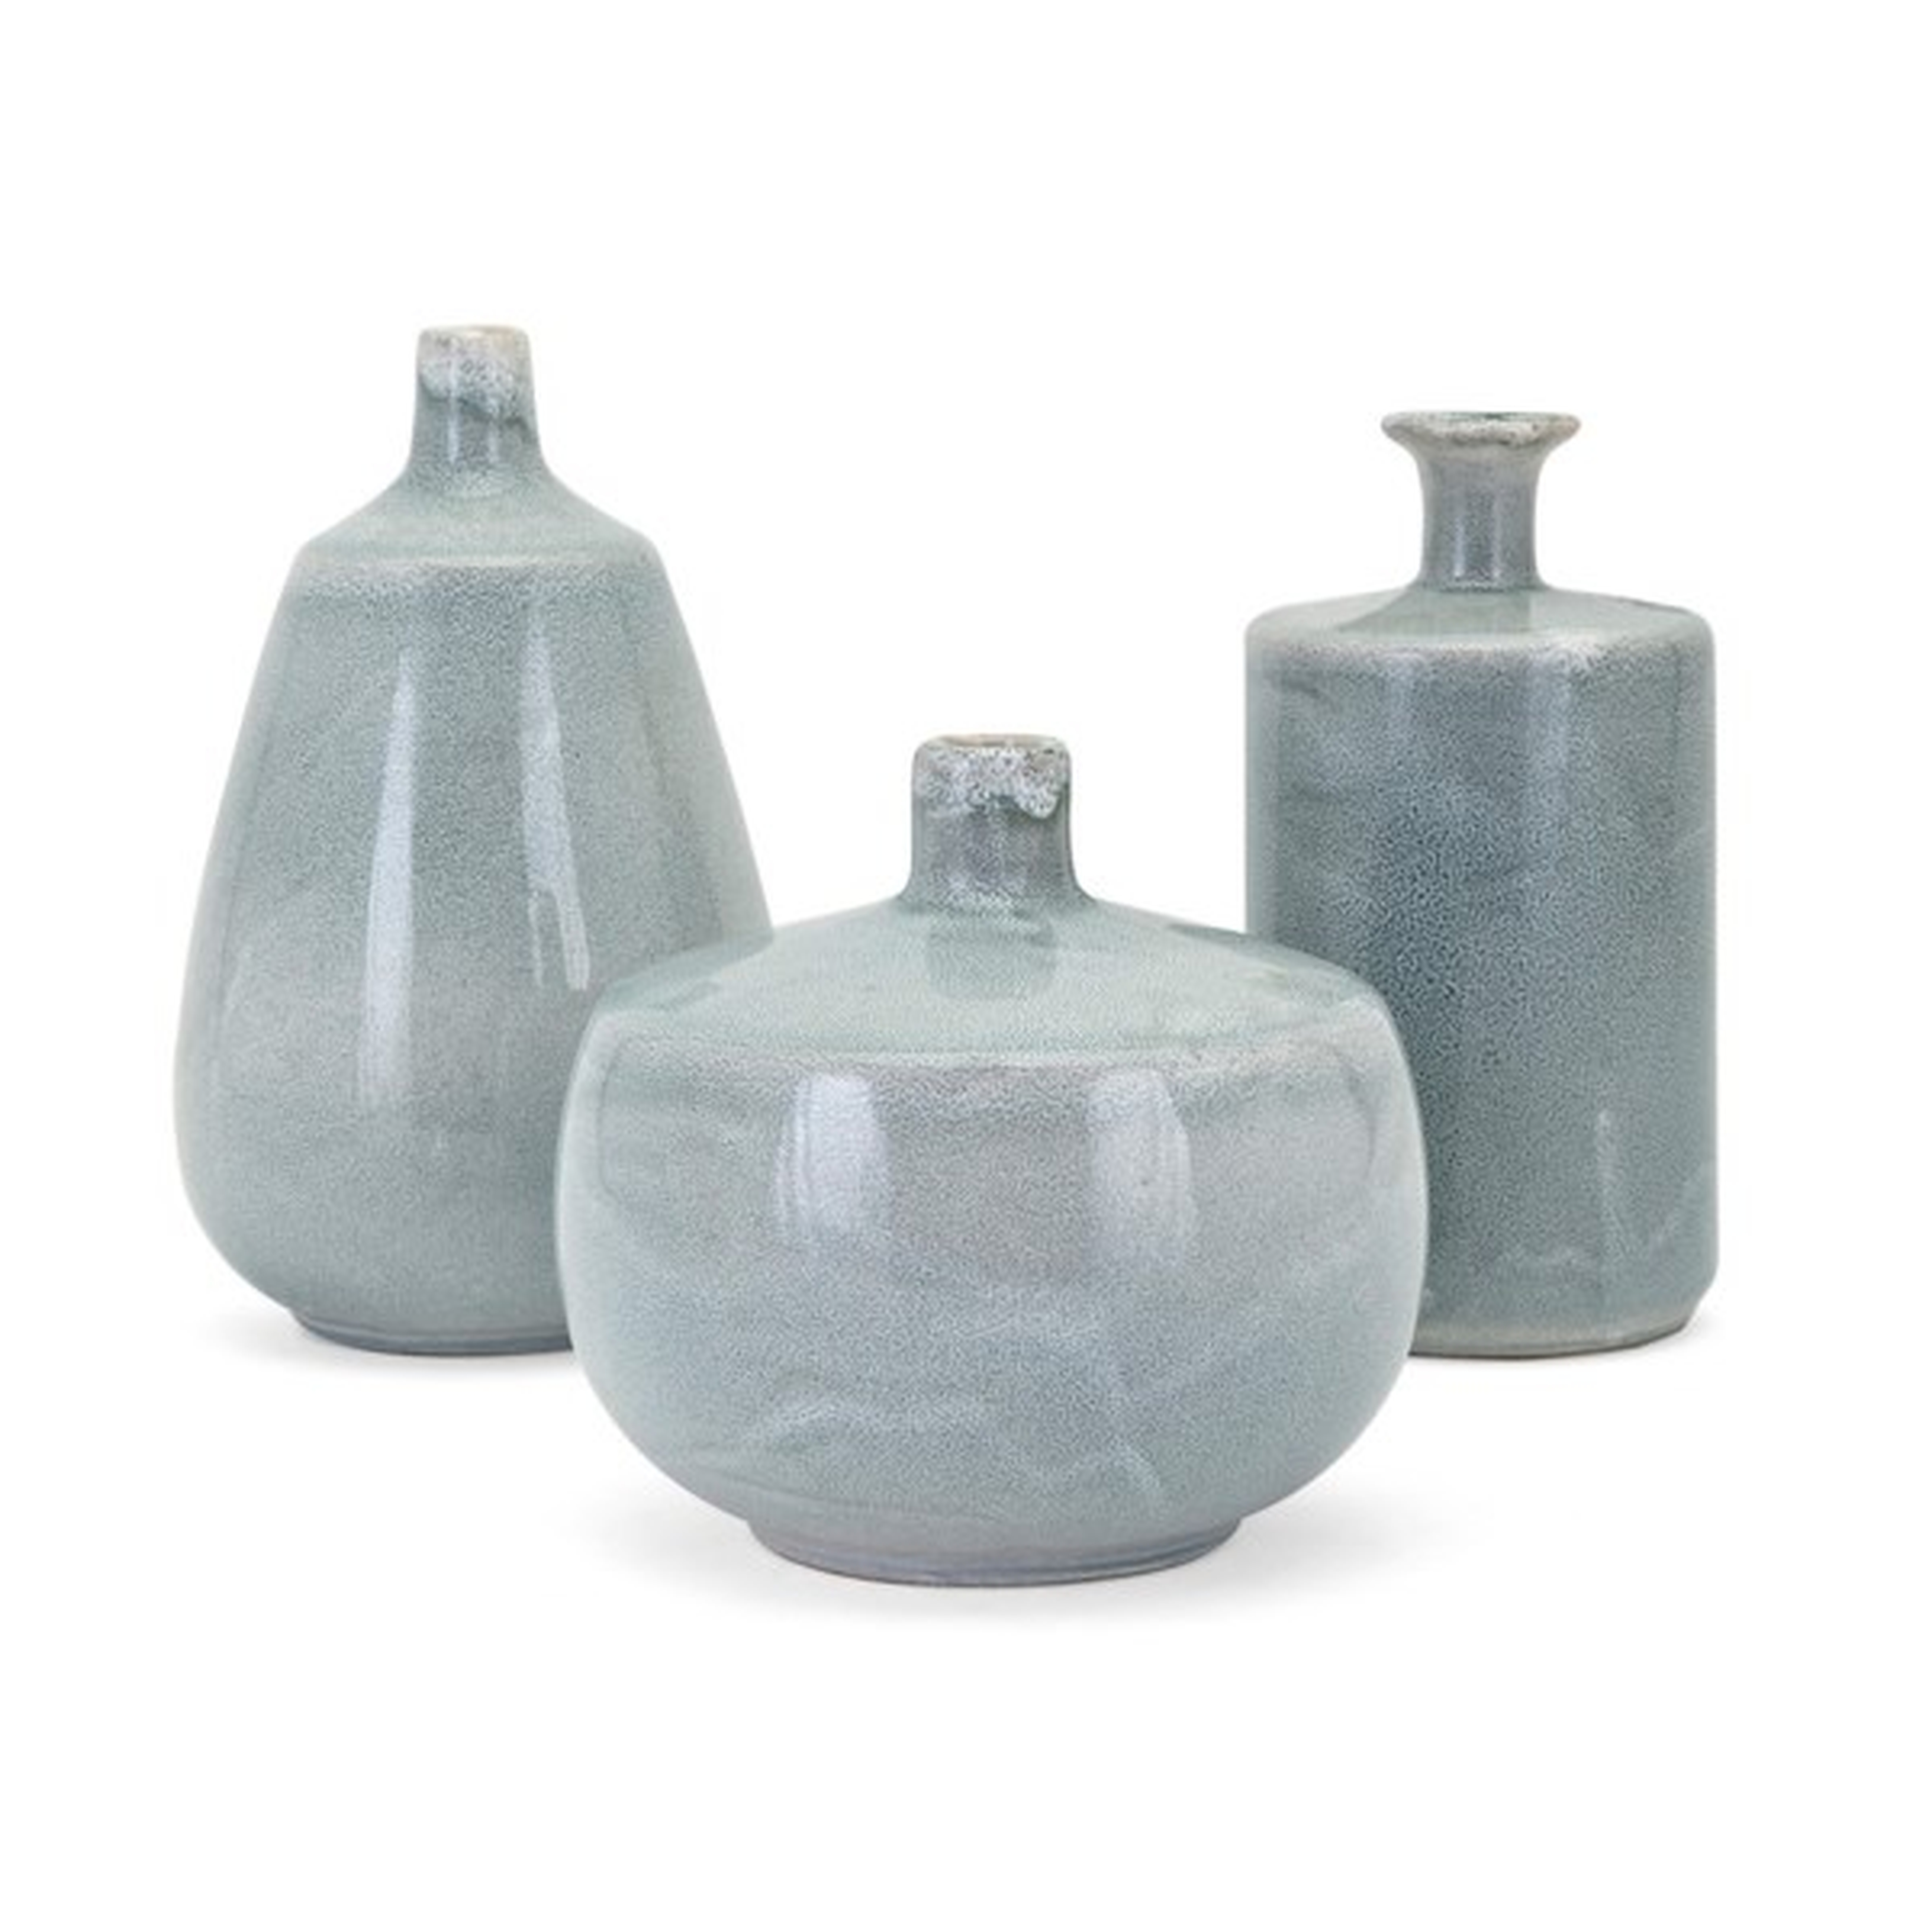 Searfoss Decorative Ceramic 3 Piece Table Vase Set See More from World Menagerie Shop (Average Product Rating  ) - Wayfair